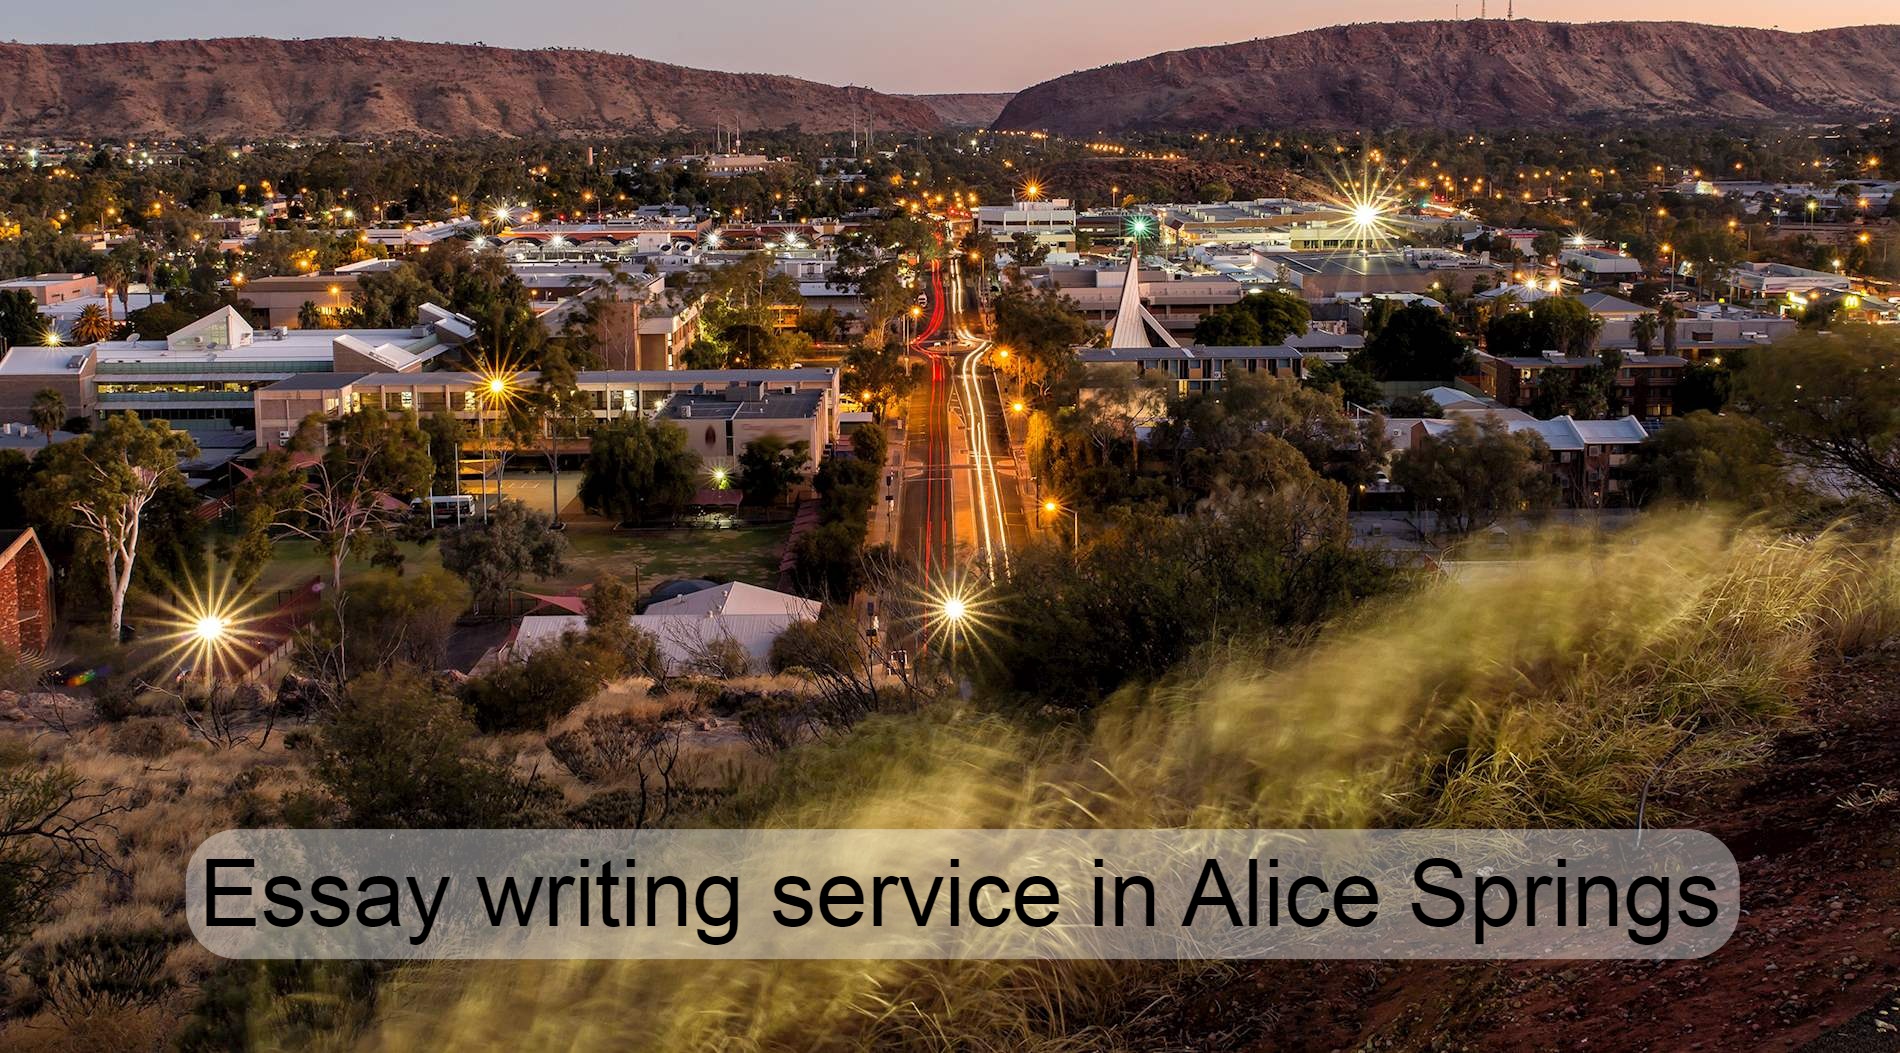 Essay writing service in Alice Springs